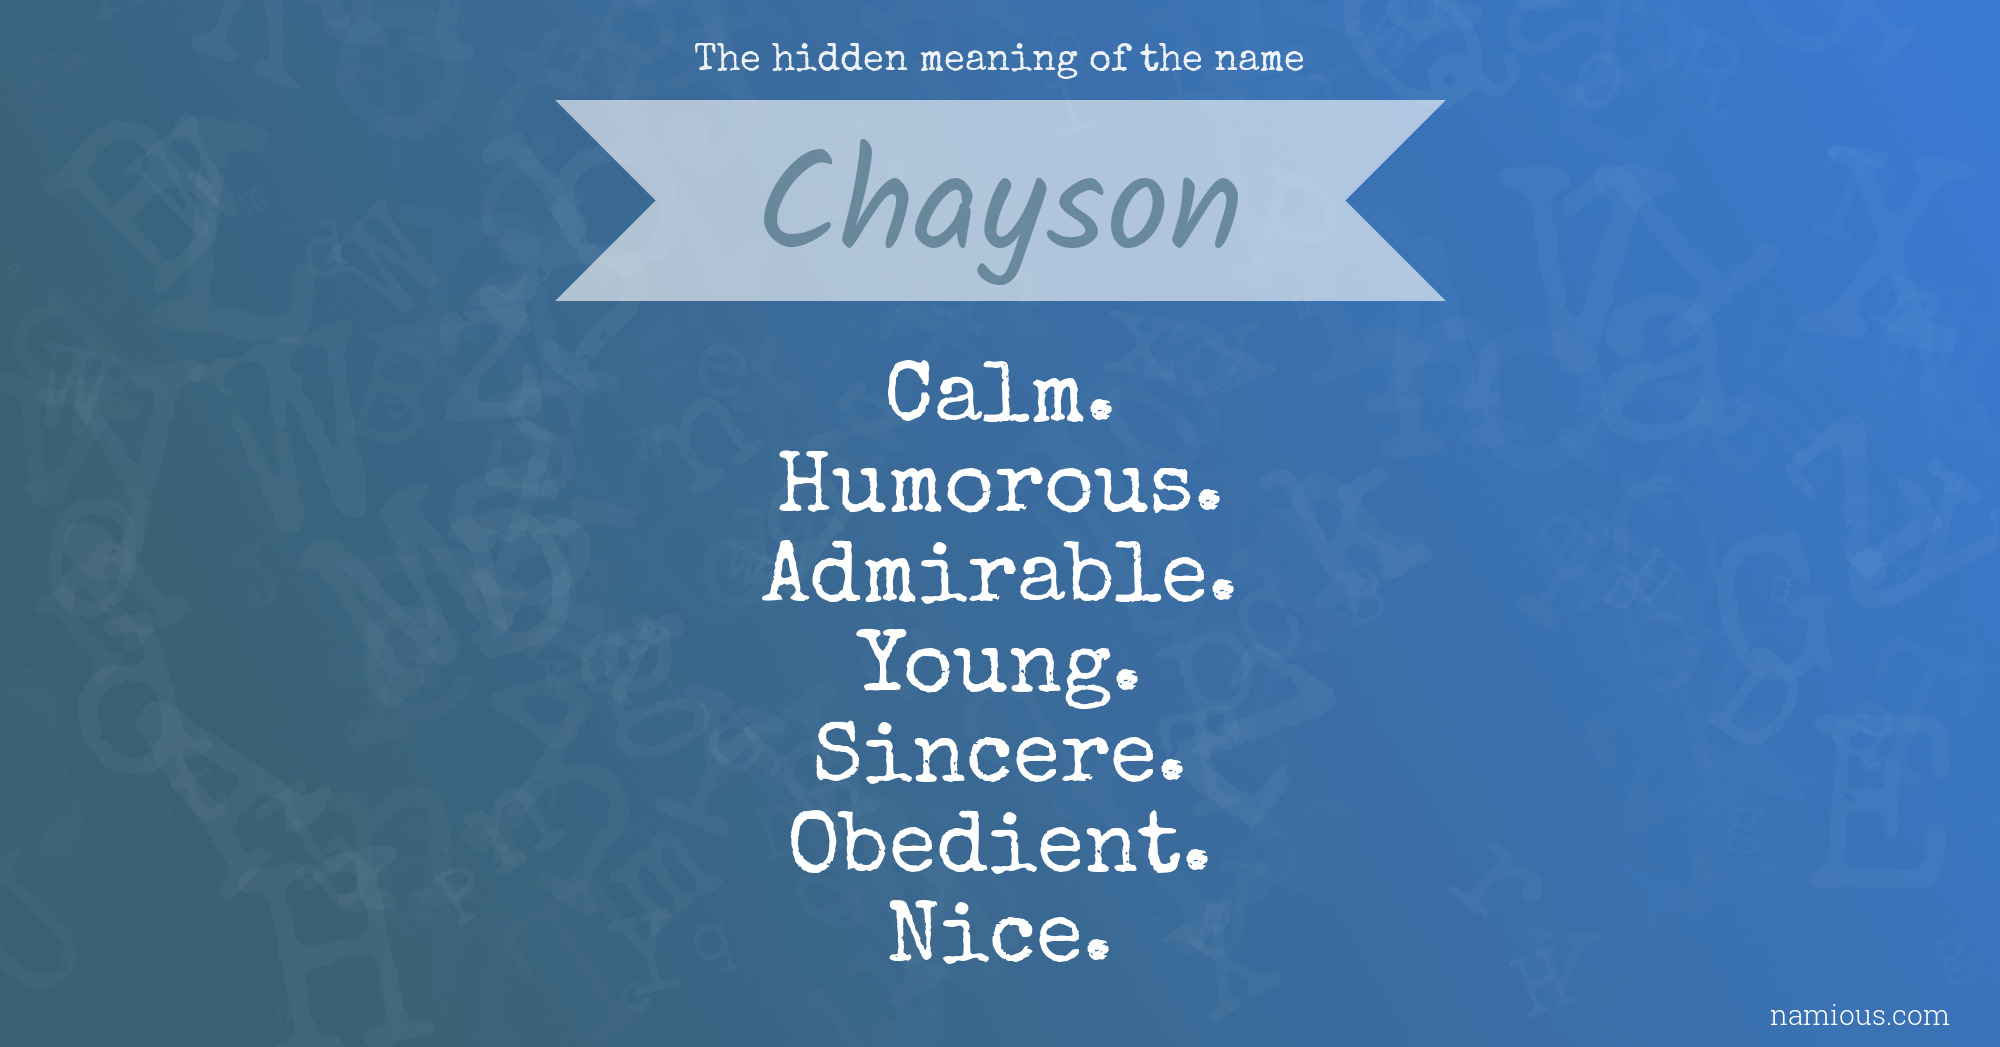 The hidden meaning of the name Chayson